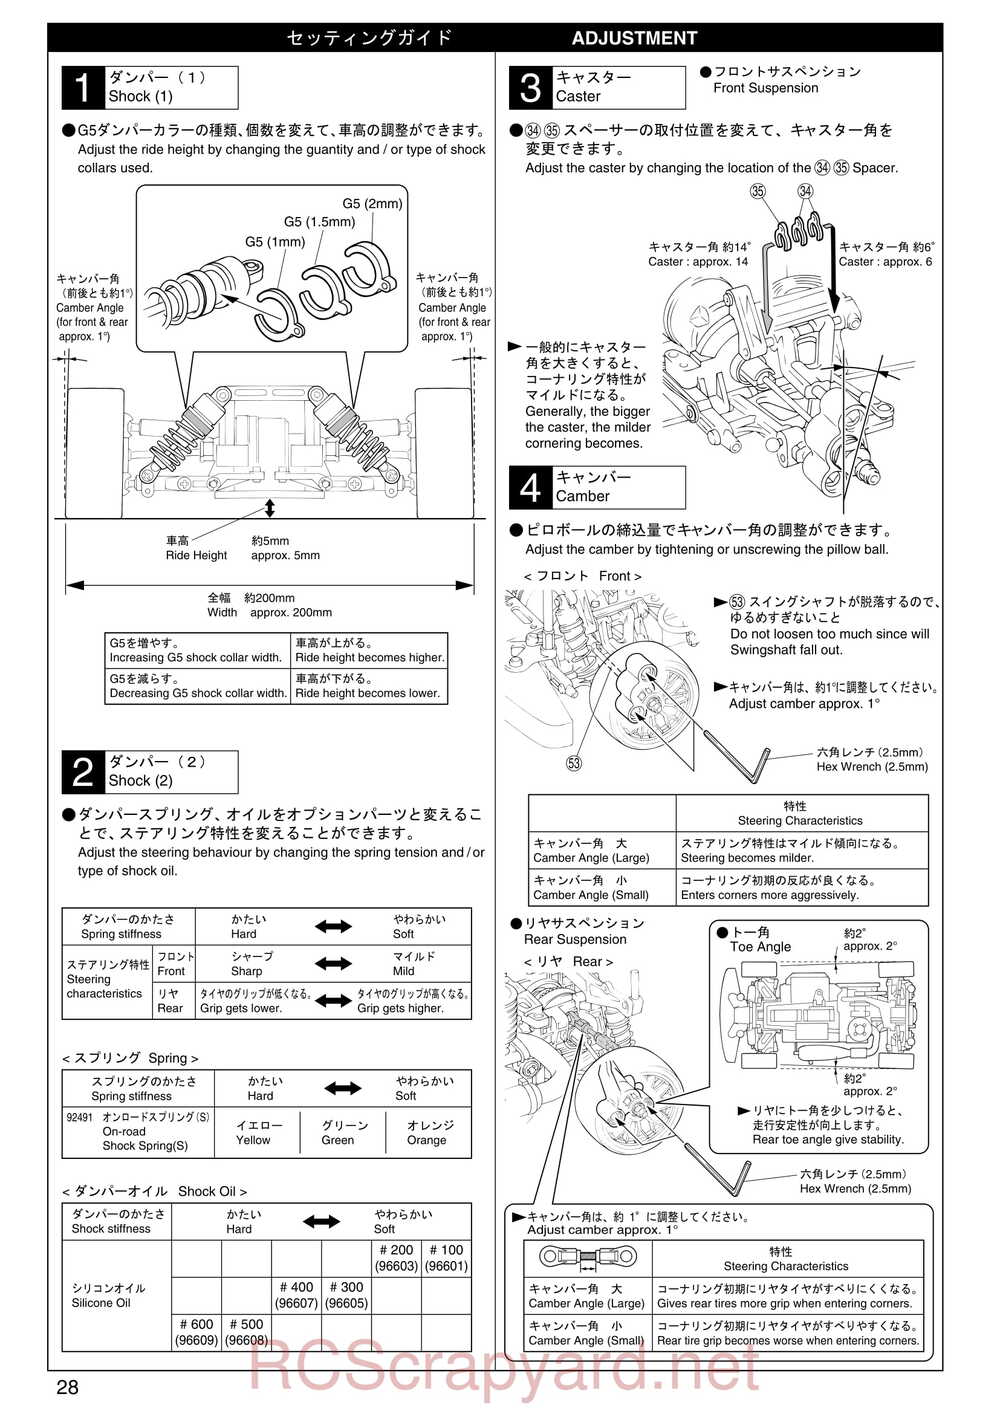 Kyosho - 31122 - V-One S2 - Manual - Page 28